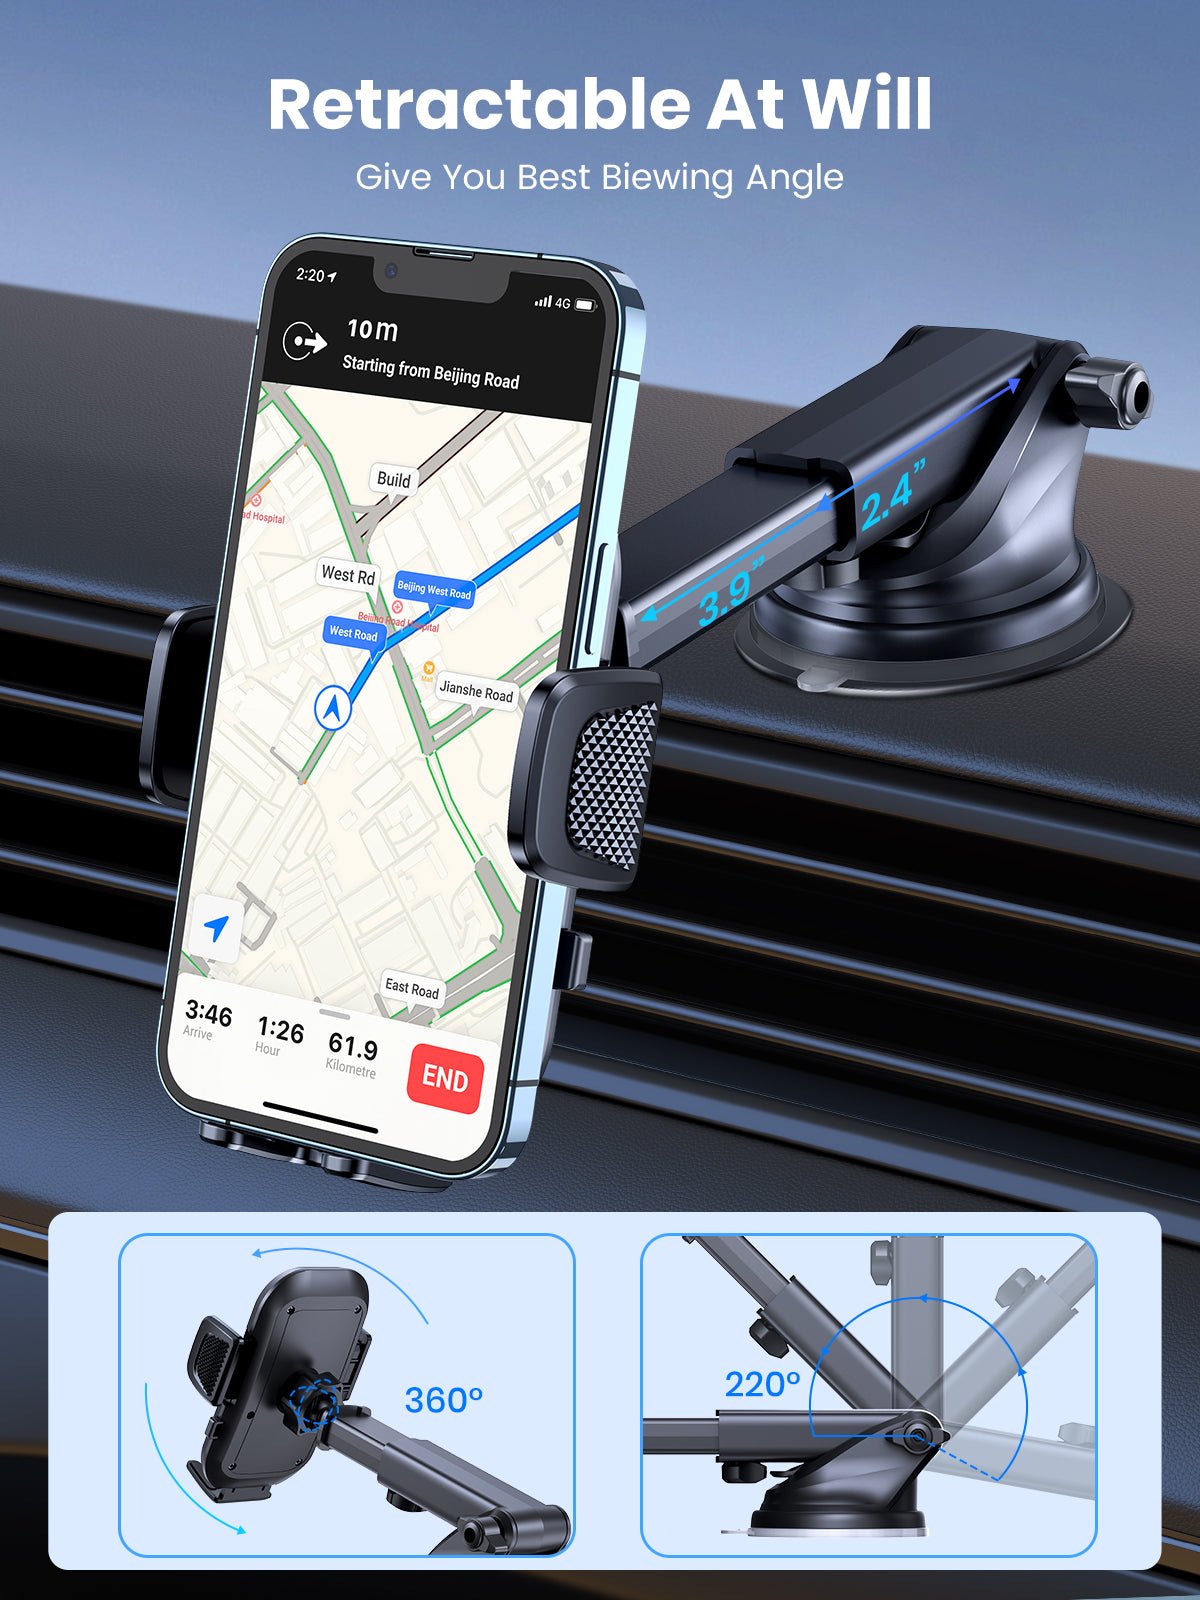 TOPK D40-Z Phone Holder for Dashboard and Car Air Vent - TOPK Official Store